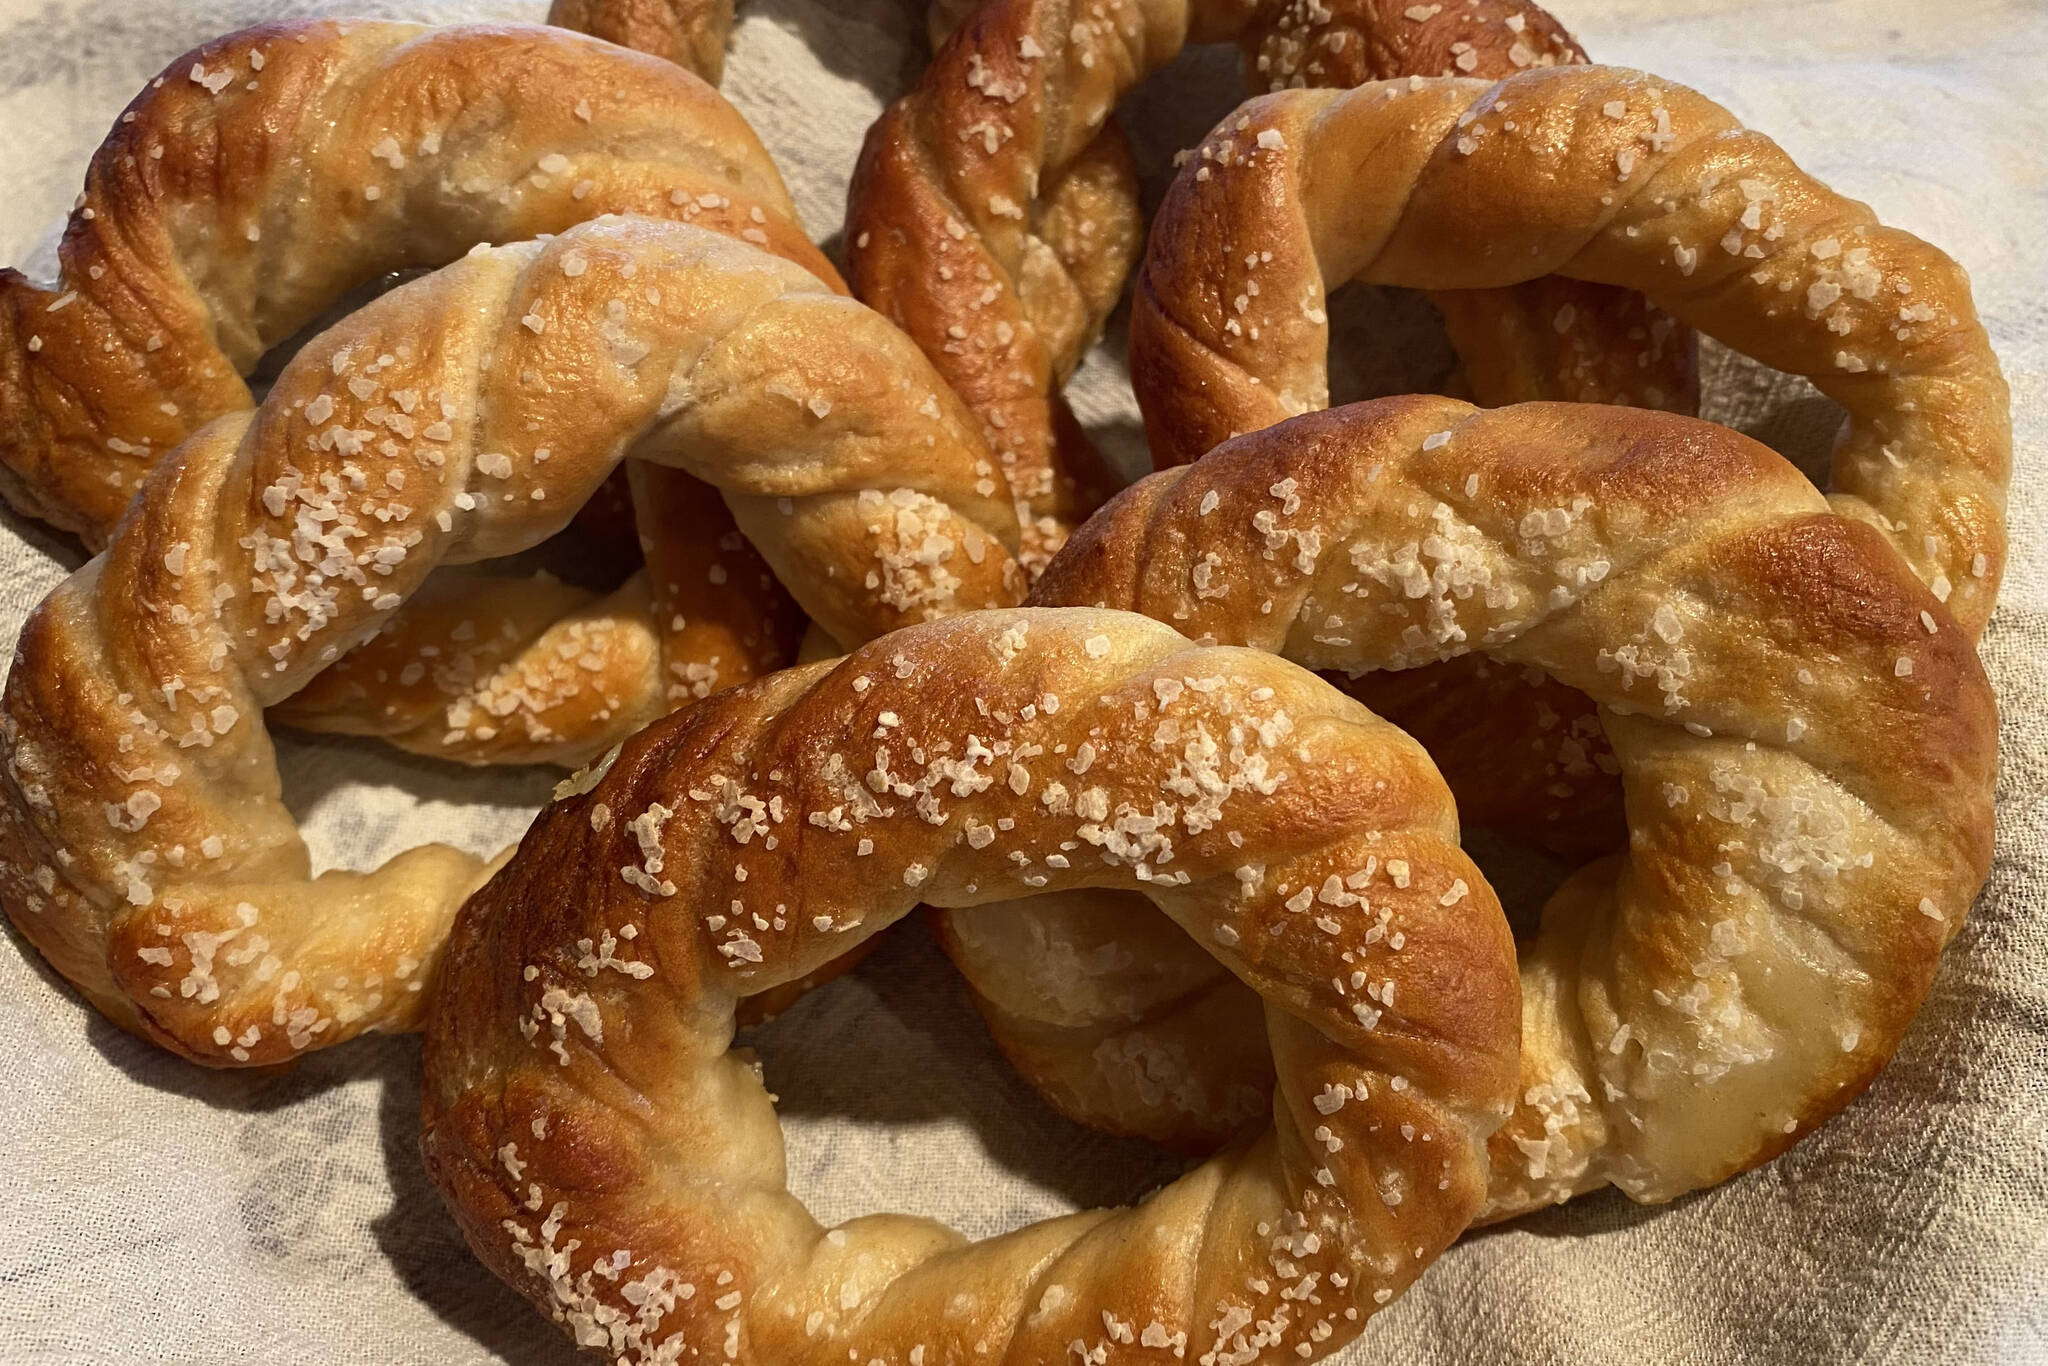 Chewy soft pretzels are easy to make at home and bring back the flavors of youth. (Photo by Tressa Dale/Penisula Clarion)